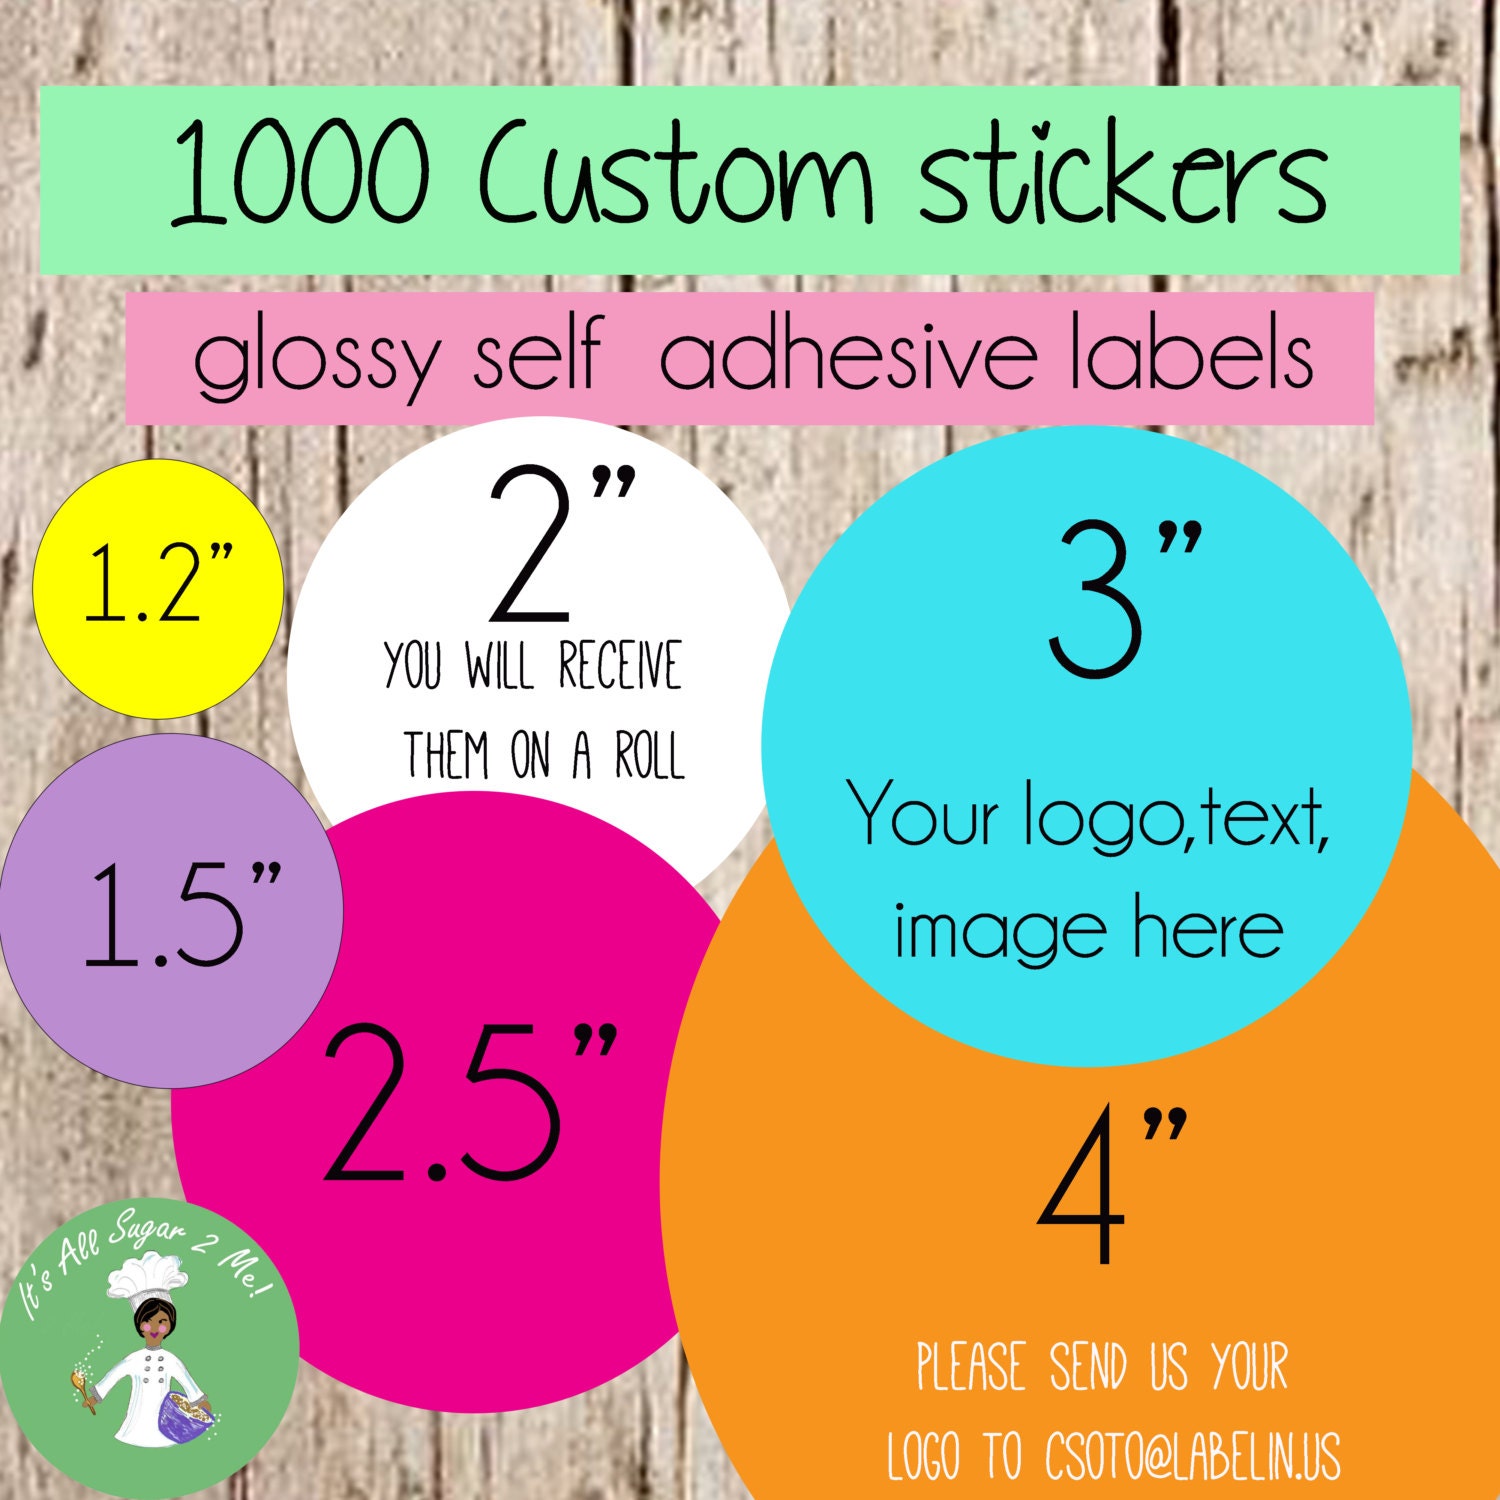 Popular Sticker Size and Shapes Guide